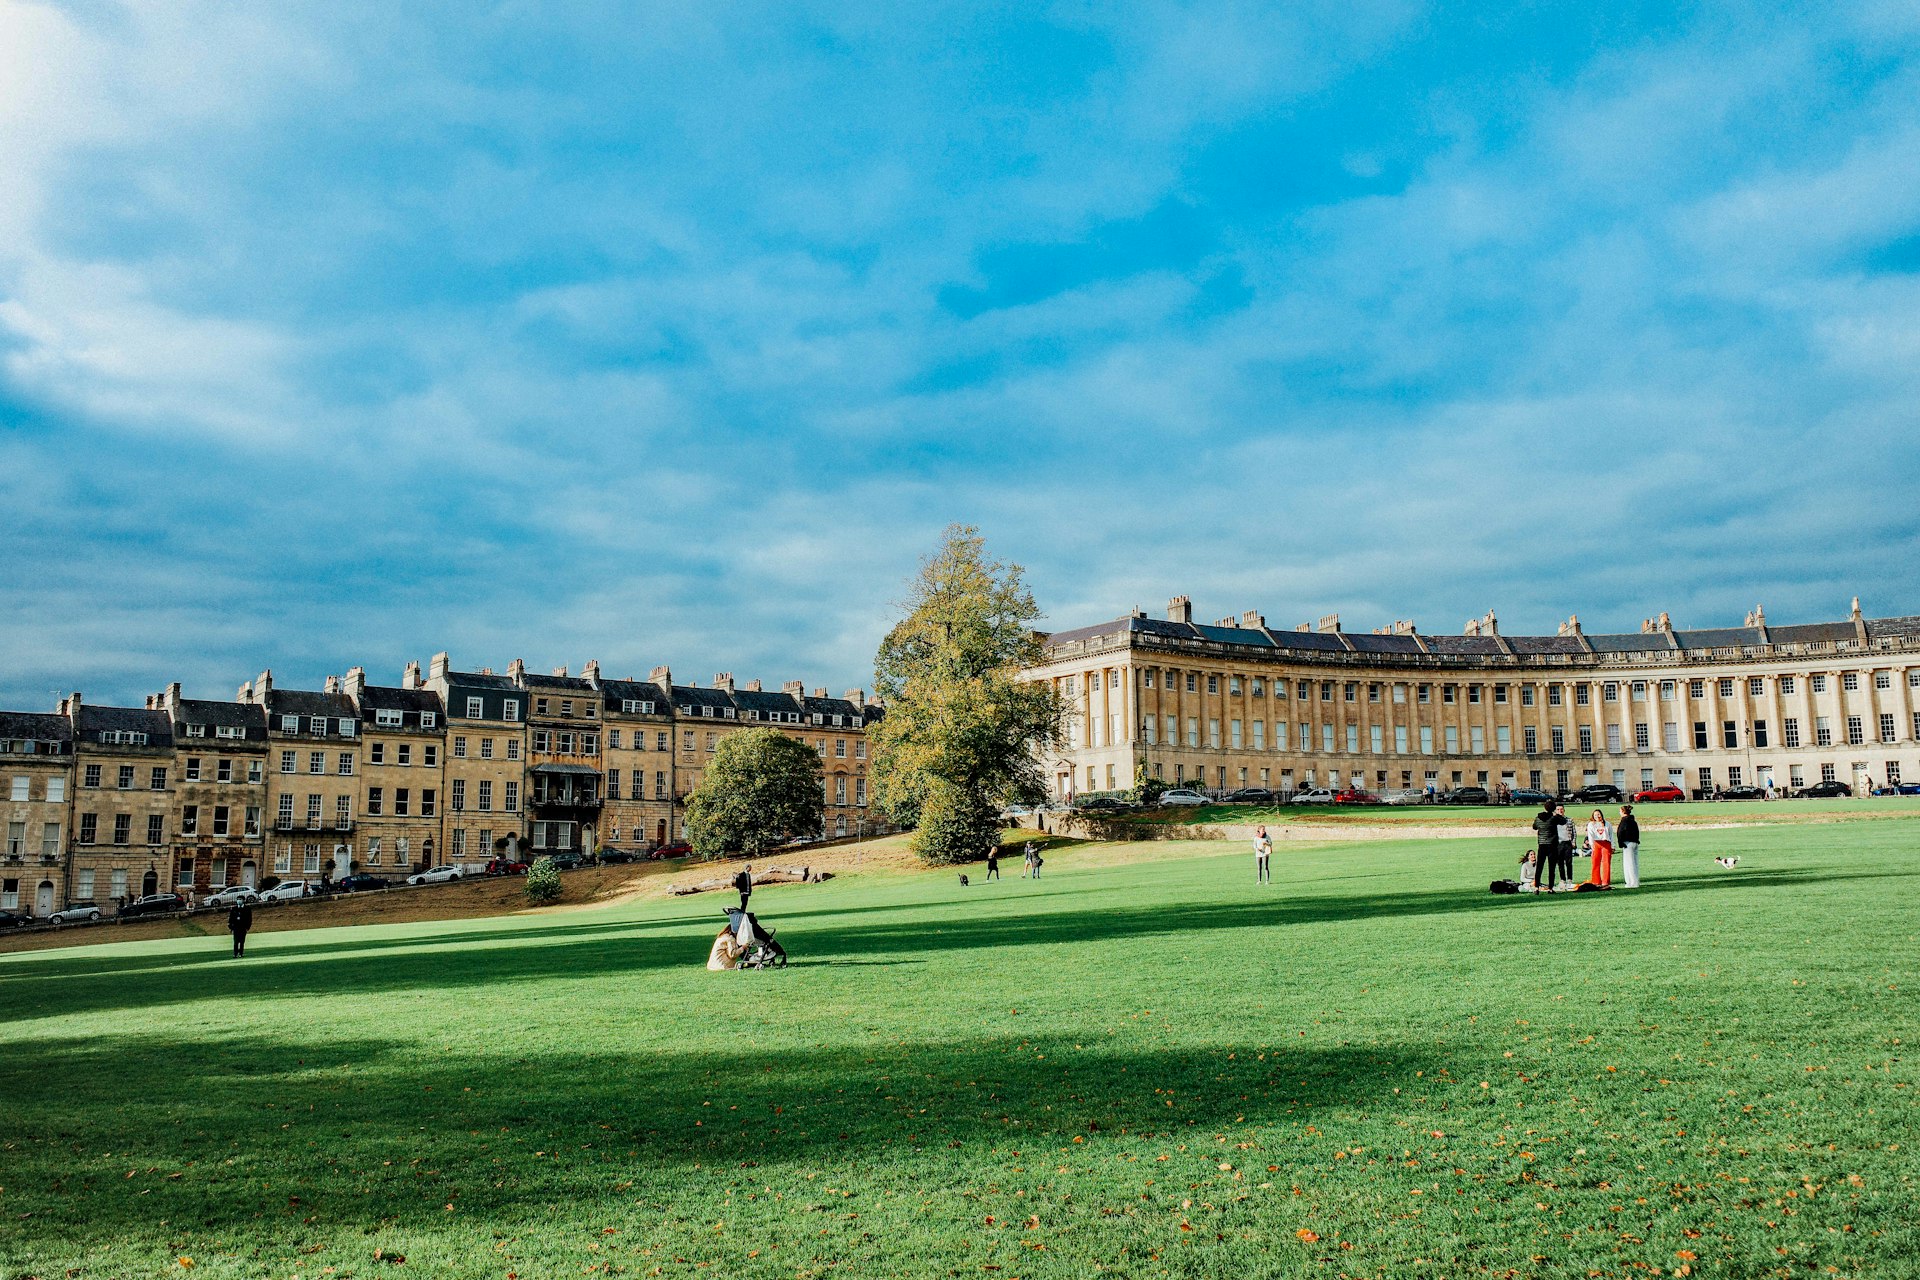 People enjoy a the sunny afternoon on the grass in front of the Royal Crescent, a curved line of honey-colored buildings in Bath, England. 